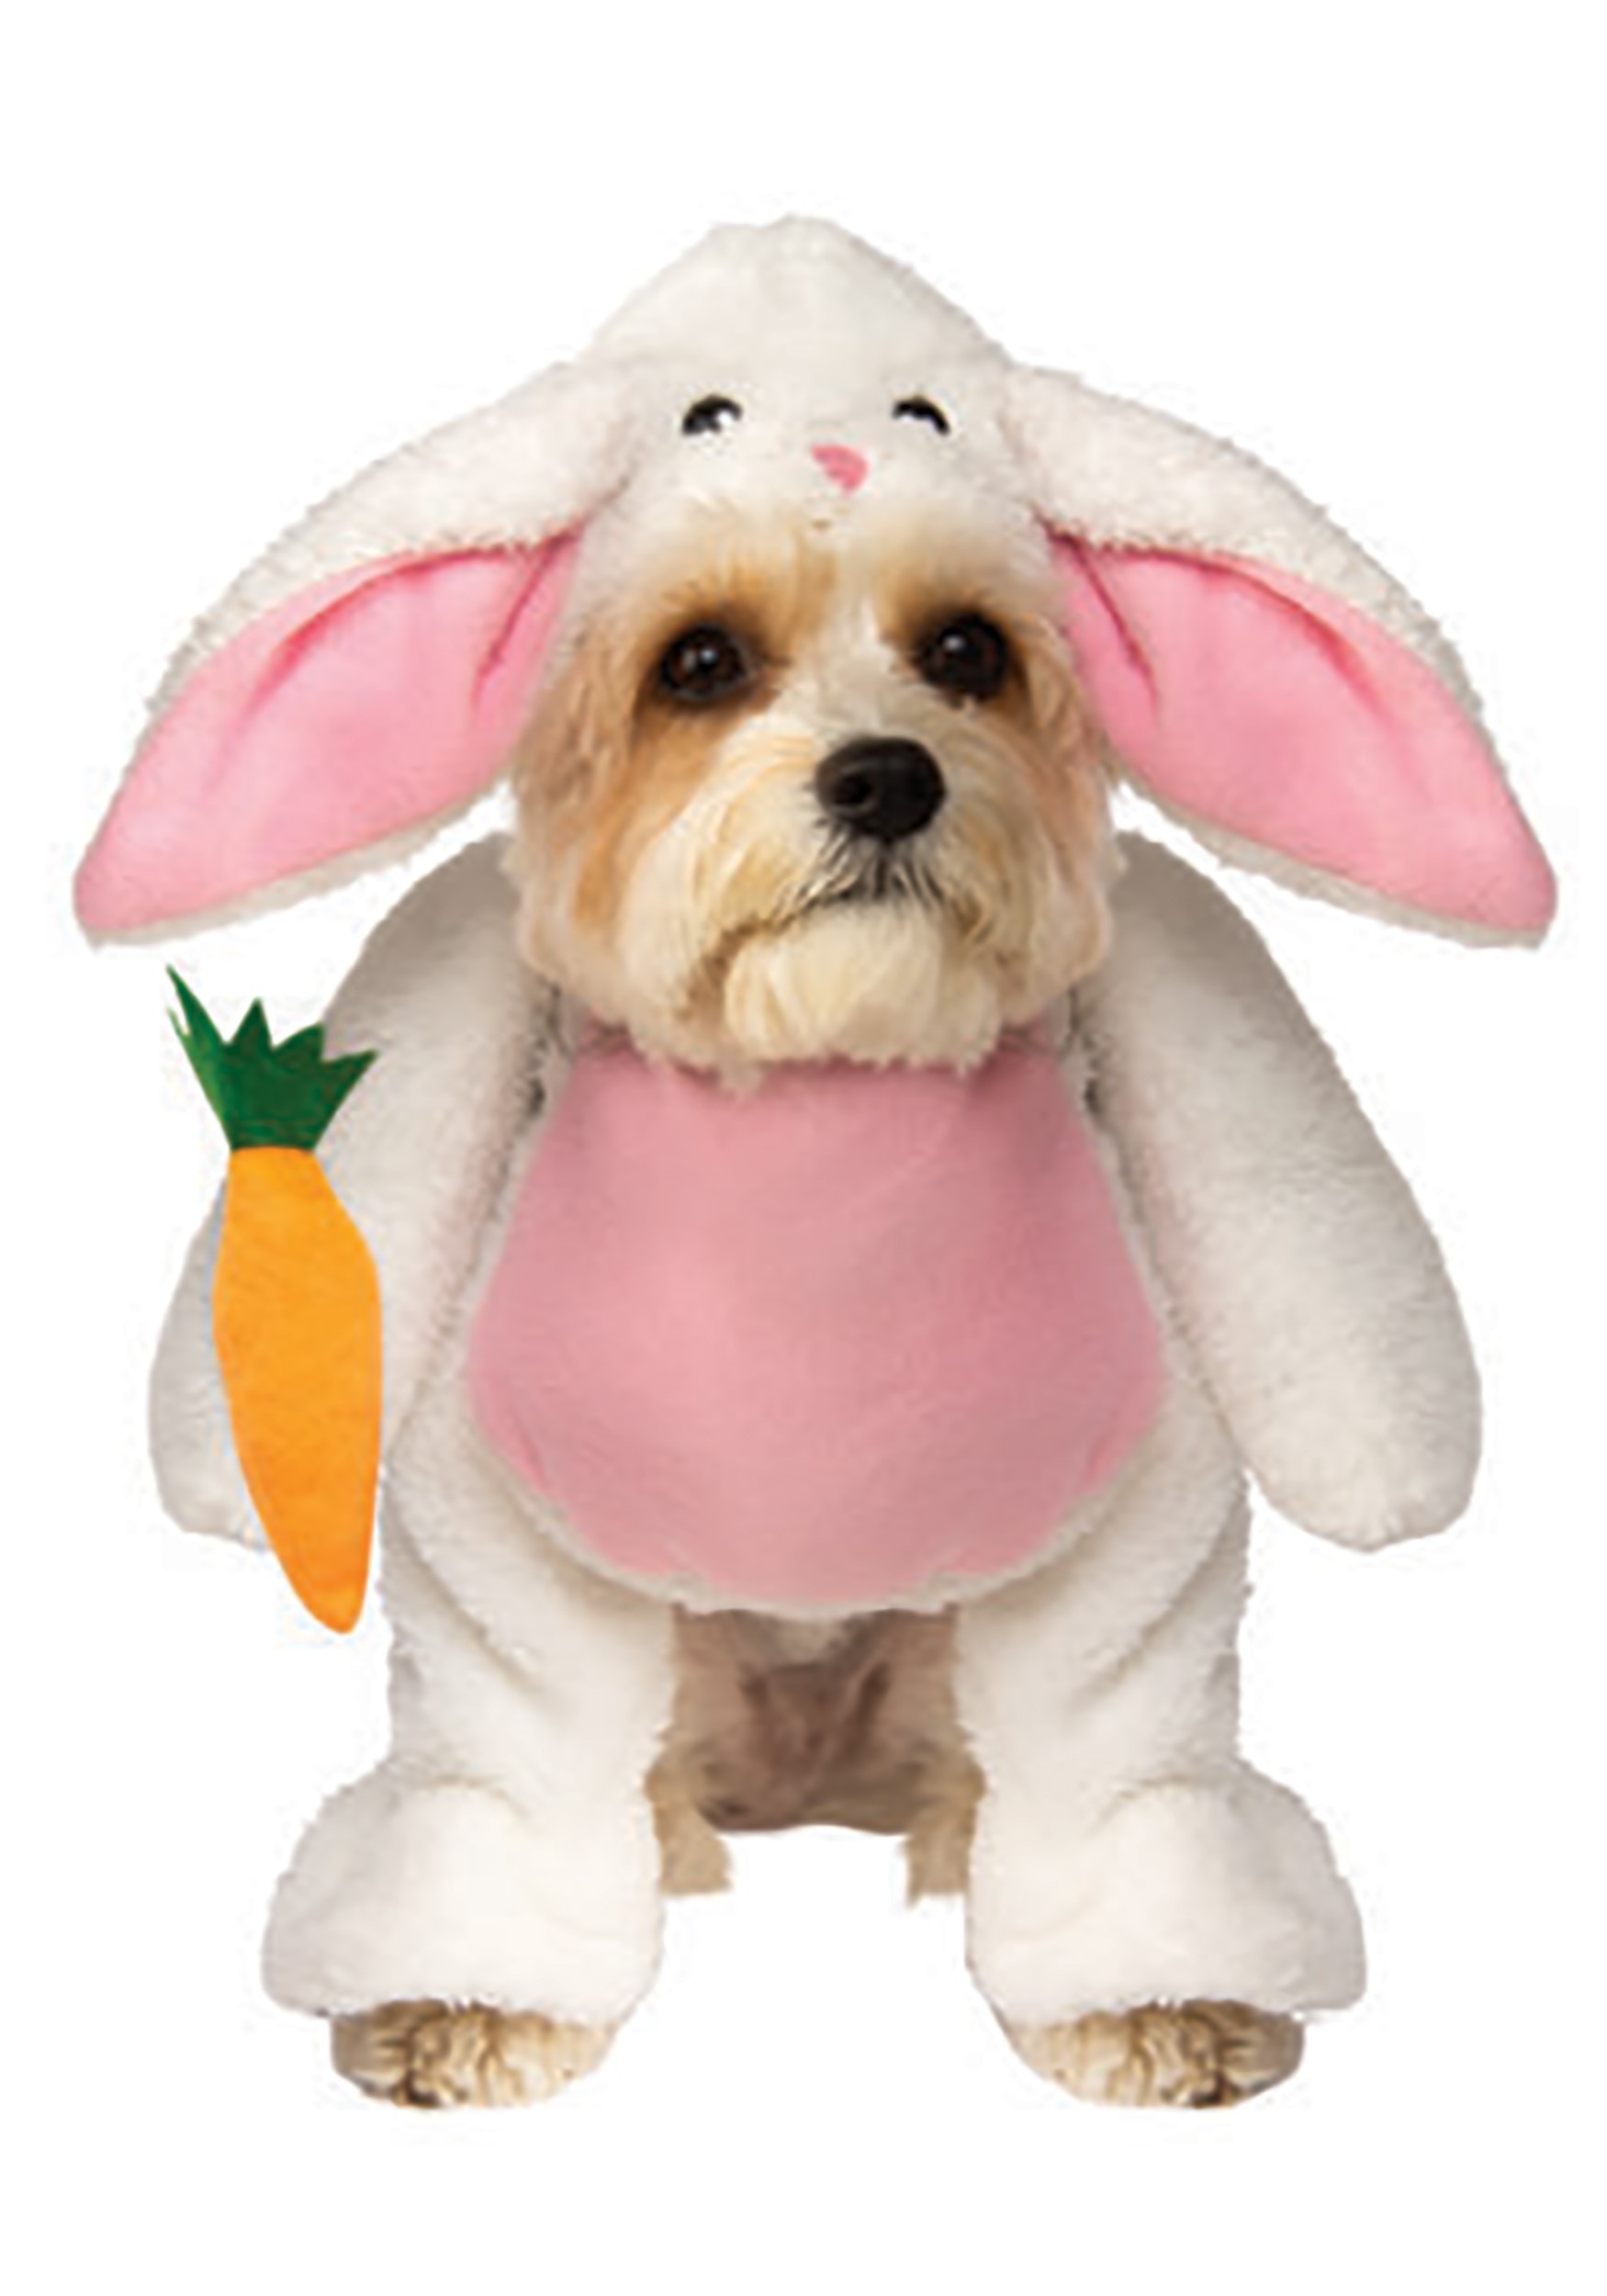 Hopping Bunny Costume for Pets